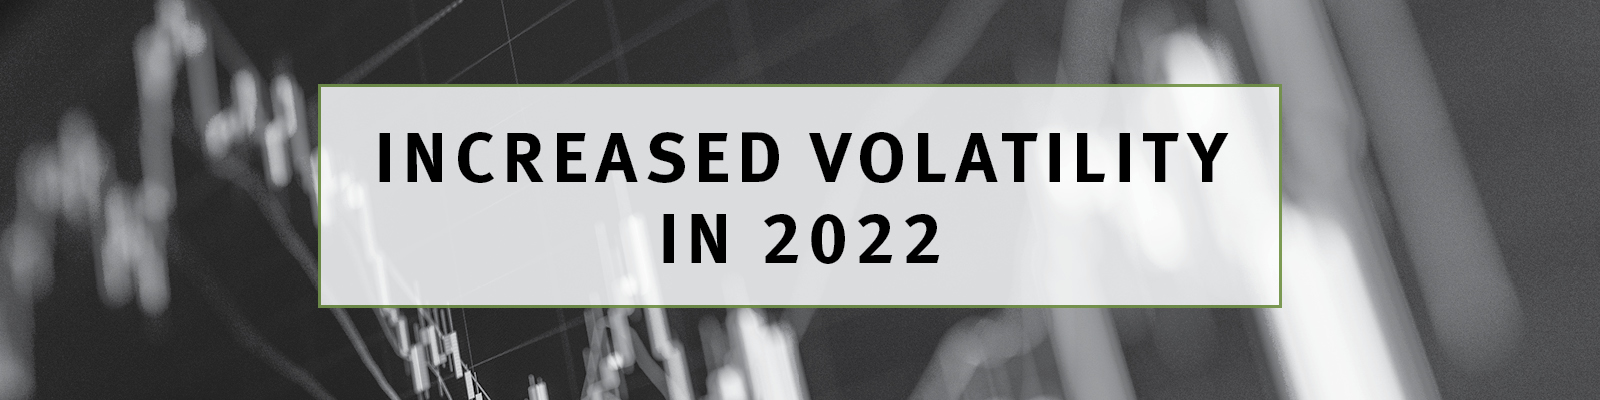 Increased Volatility in 2022